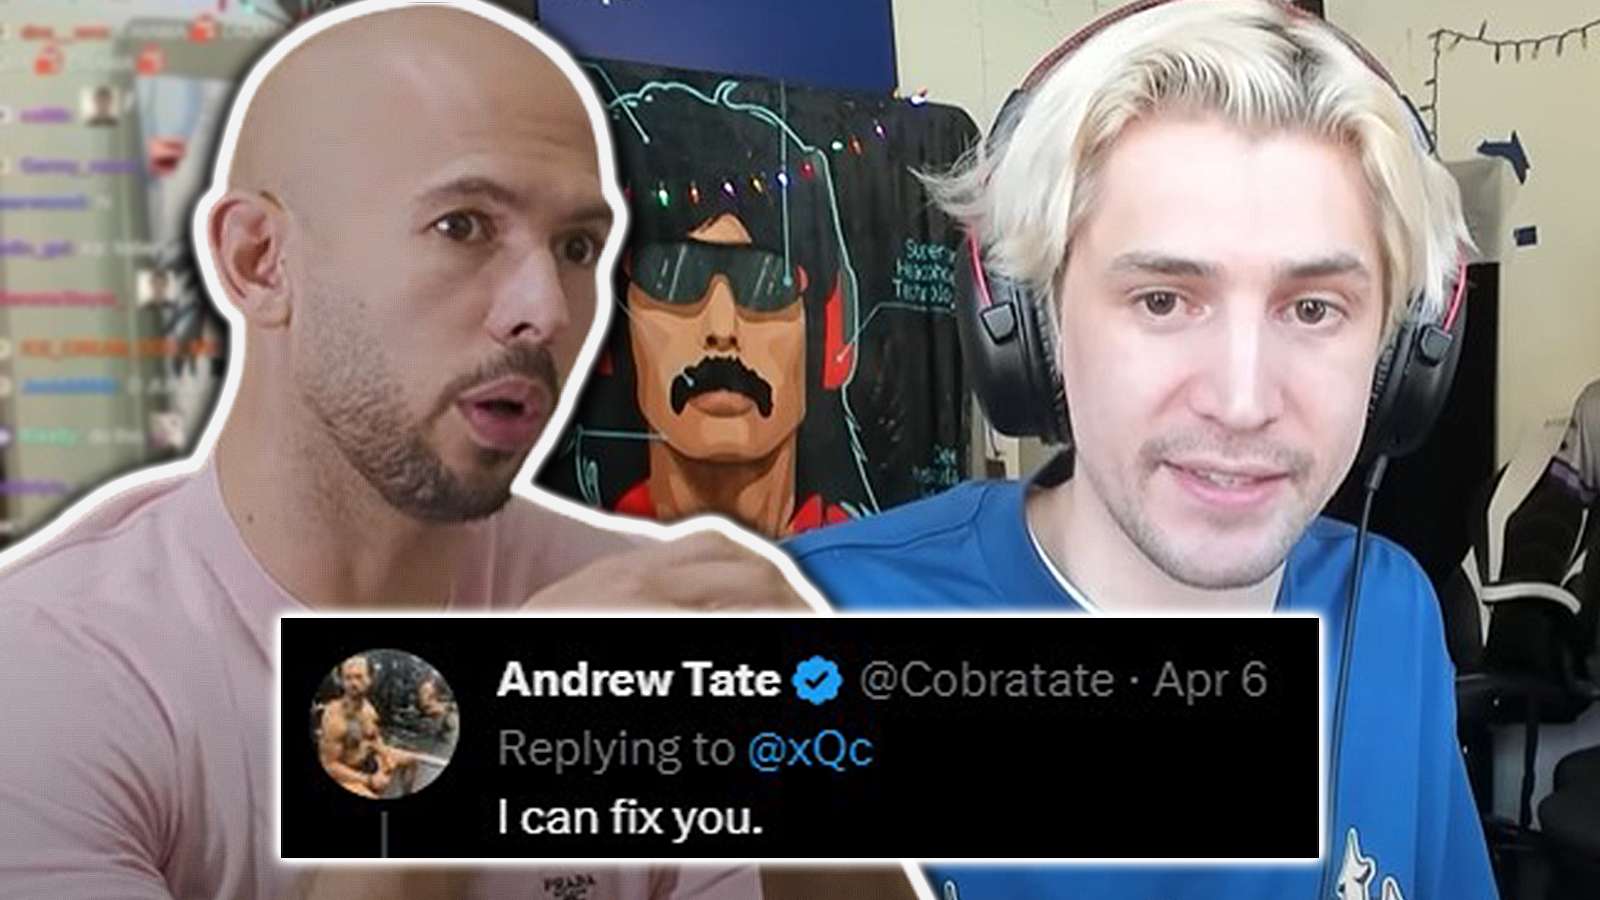 xQc reacts to getting ratio'd by Andrew Tate in viral tweet